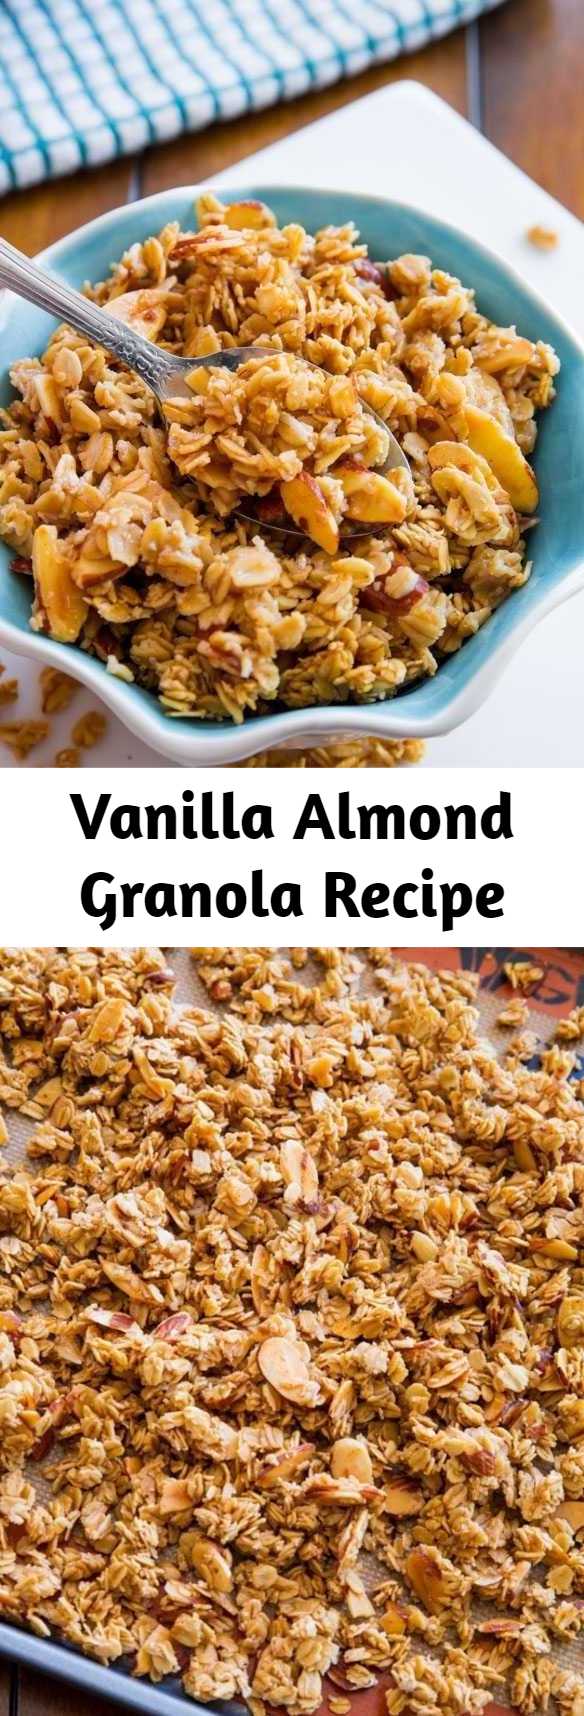 Vanilla Almond Granola Recipe - Sweet, sticky, and crunchy granola exploding with vanilla and almond flavors. Ditch store-bought, healthy homemade granola is easy! This recipe is vegan and gluten free (if using certified GF oats).